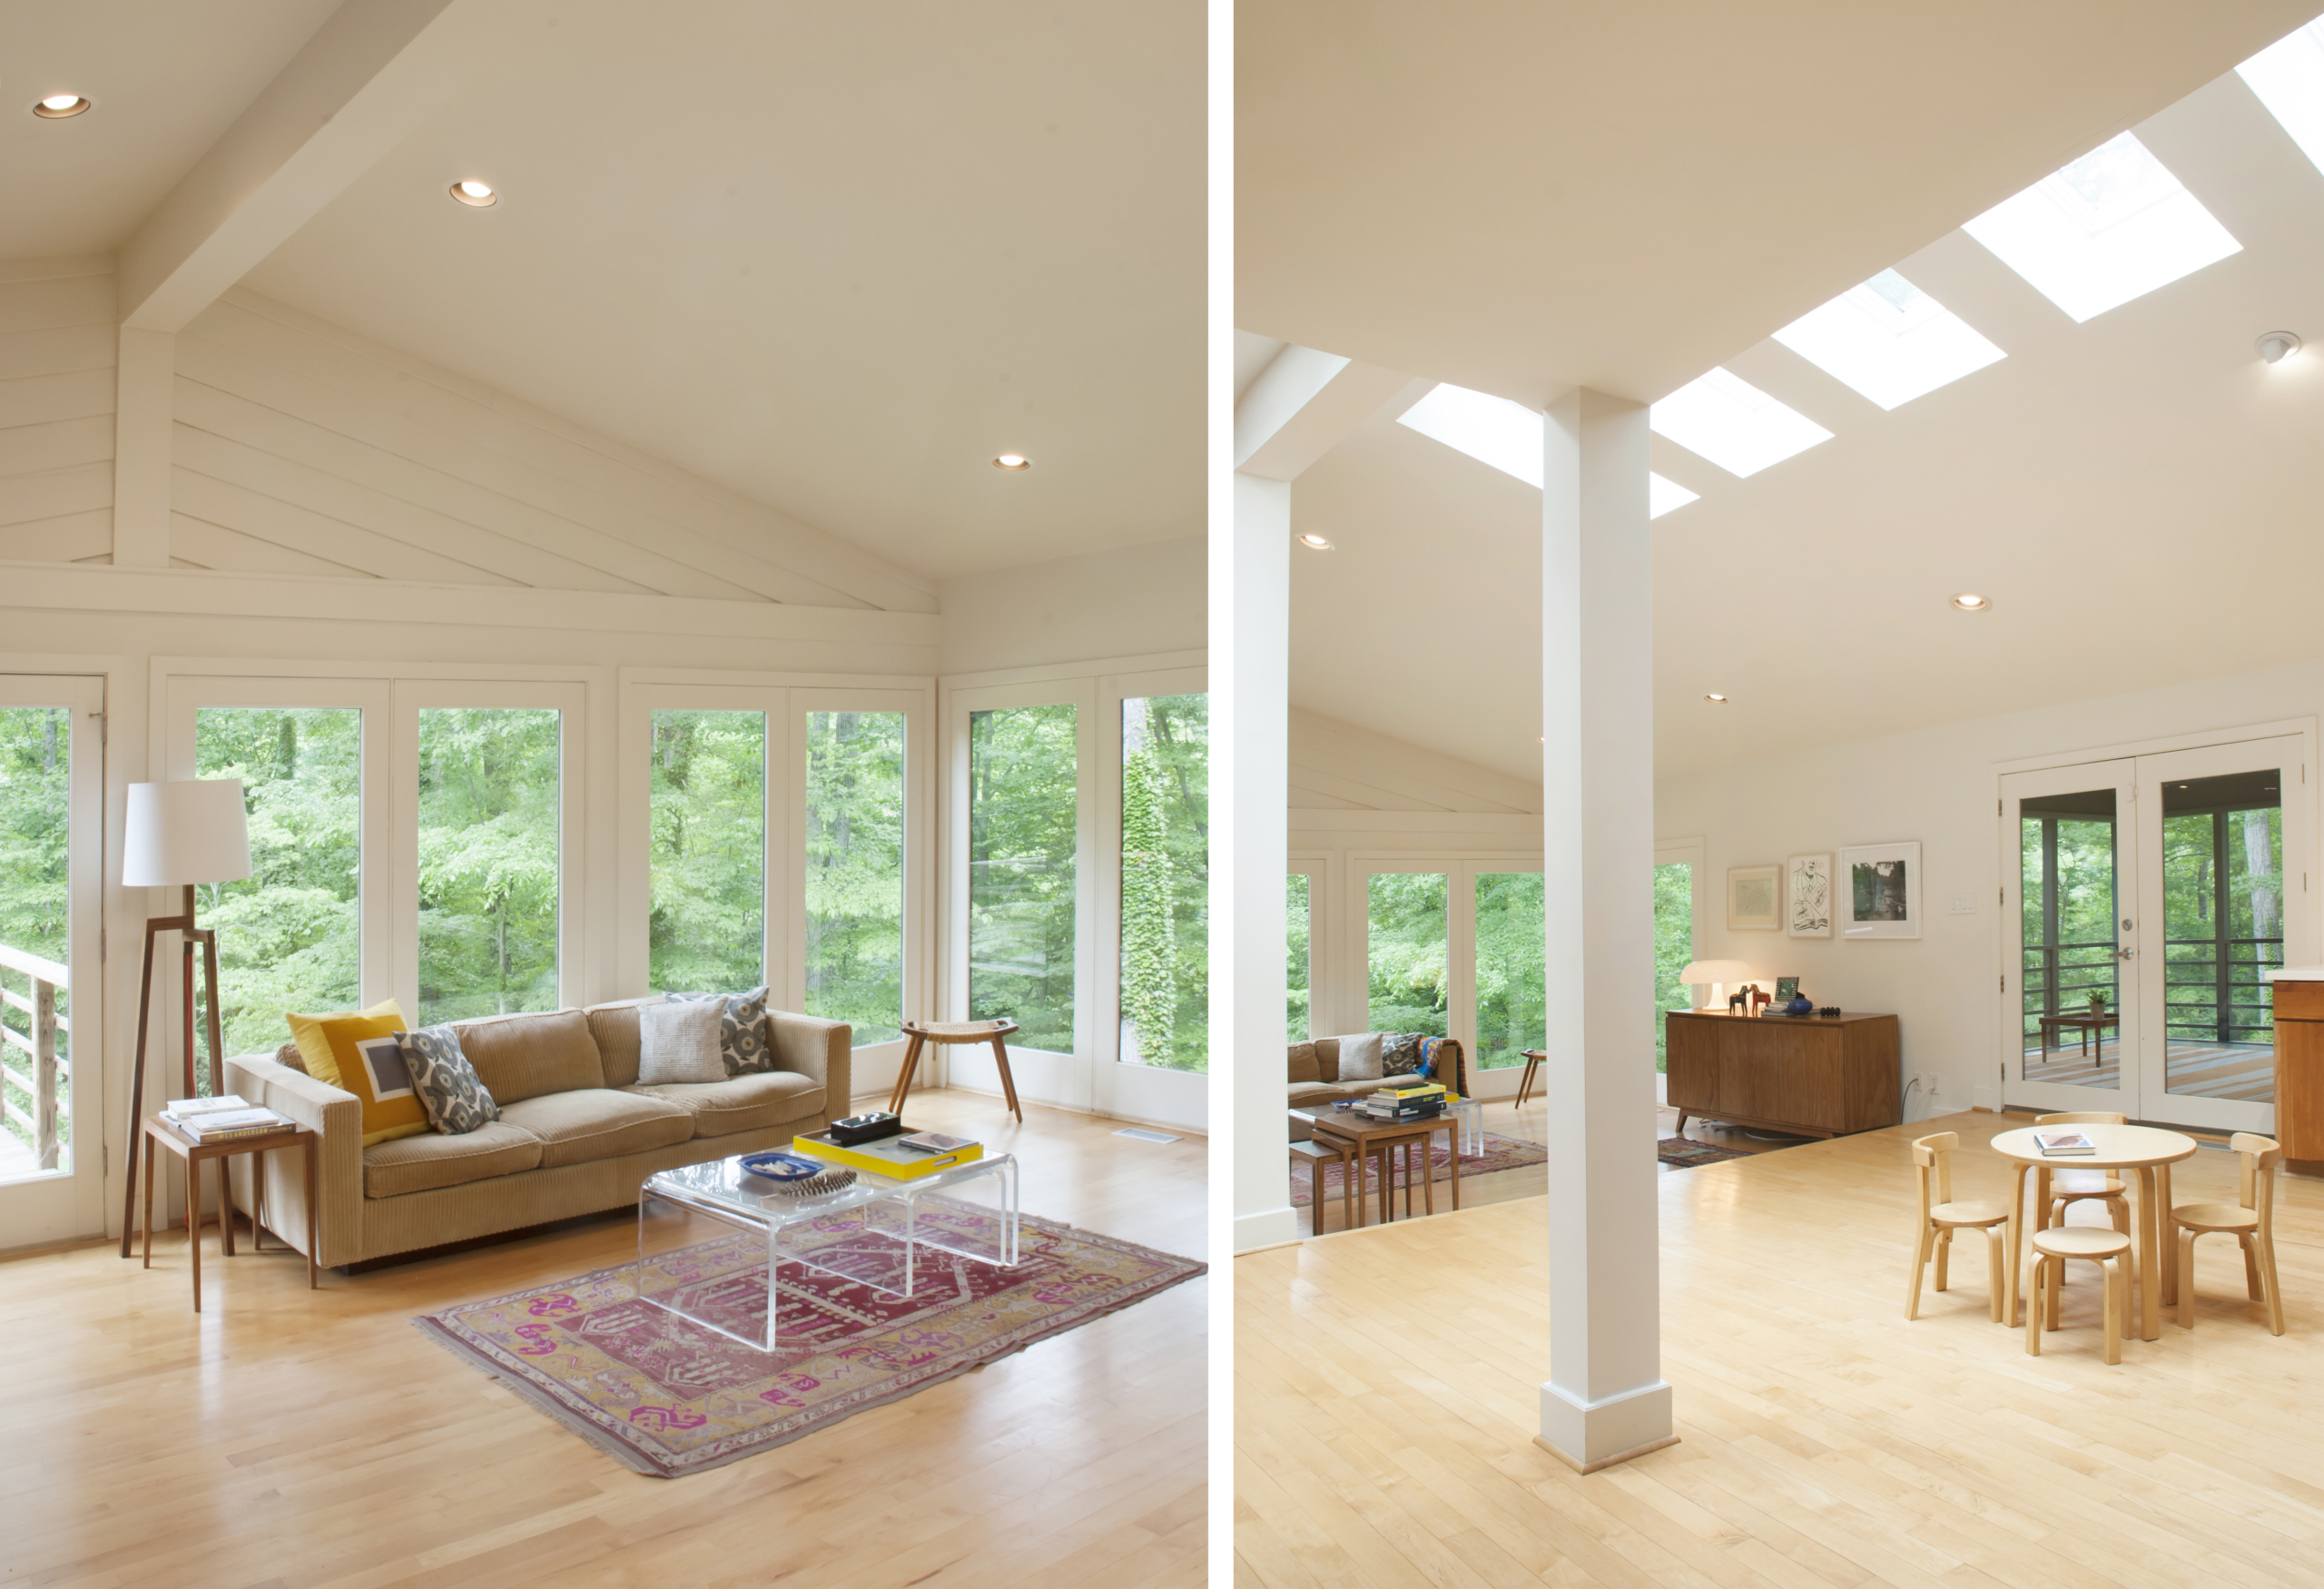 A collage of two images of the living room showing the seating area surrounded by windows and the row of skylights that bring a peaceful glowing light into the space